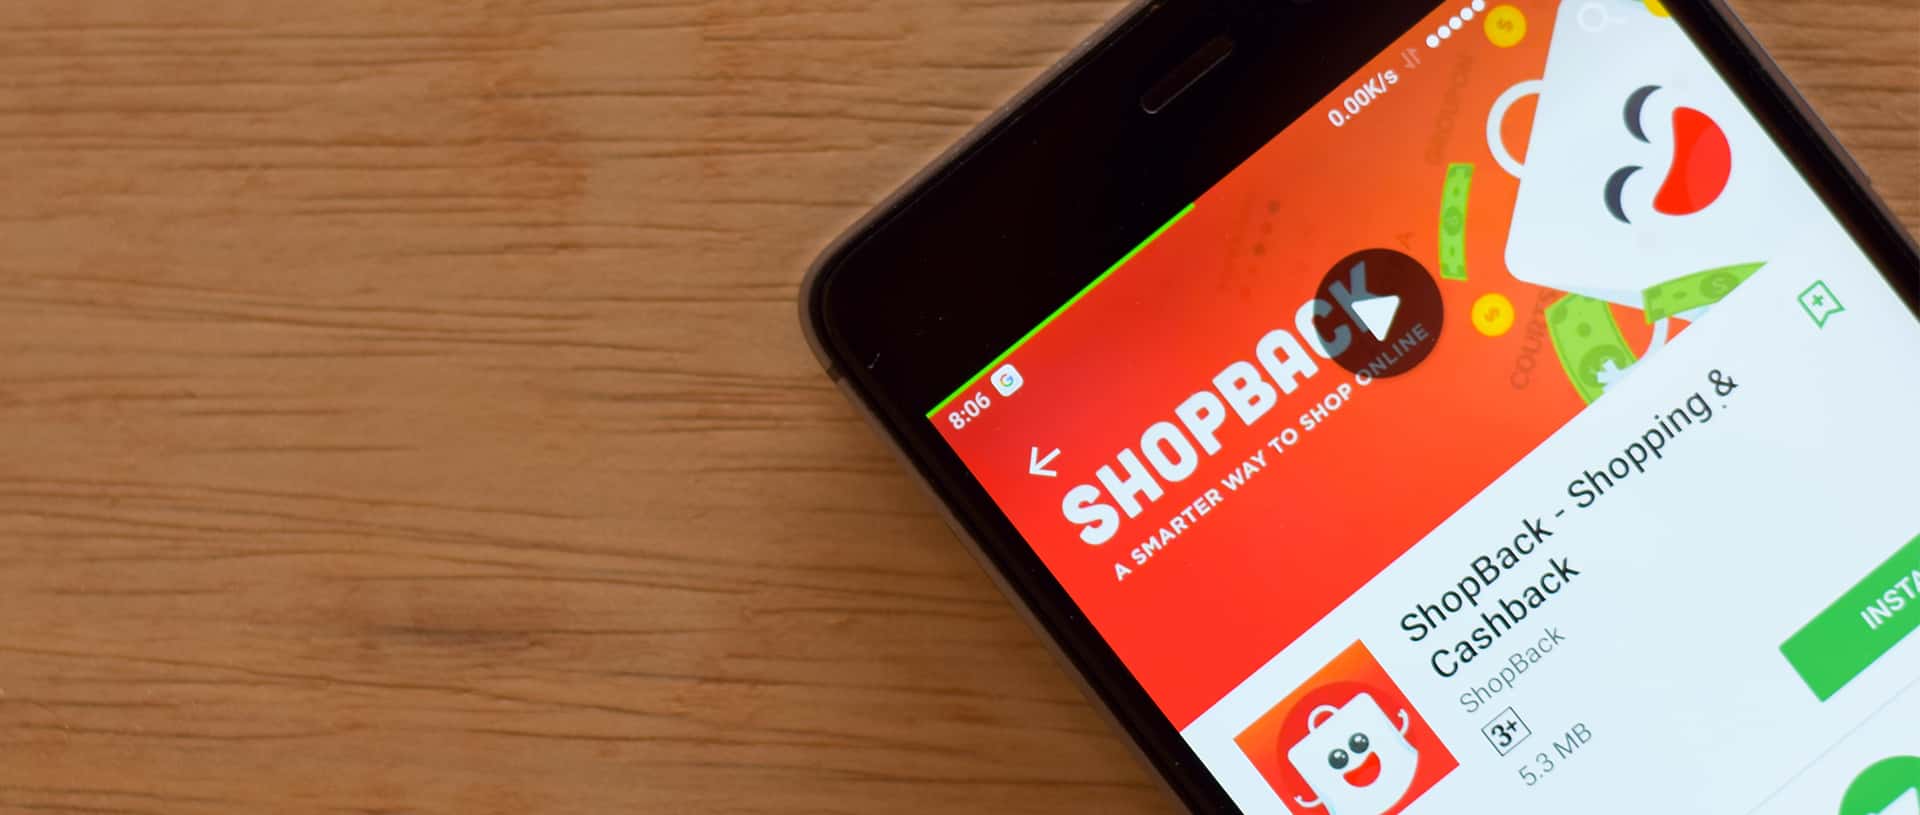 How e-commerce site ShopBack makes shopping so much sweeter in Southeast Asia